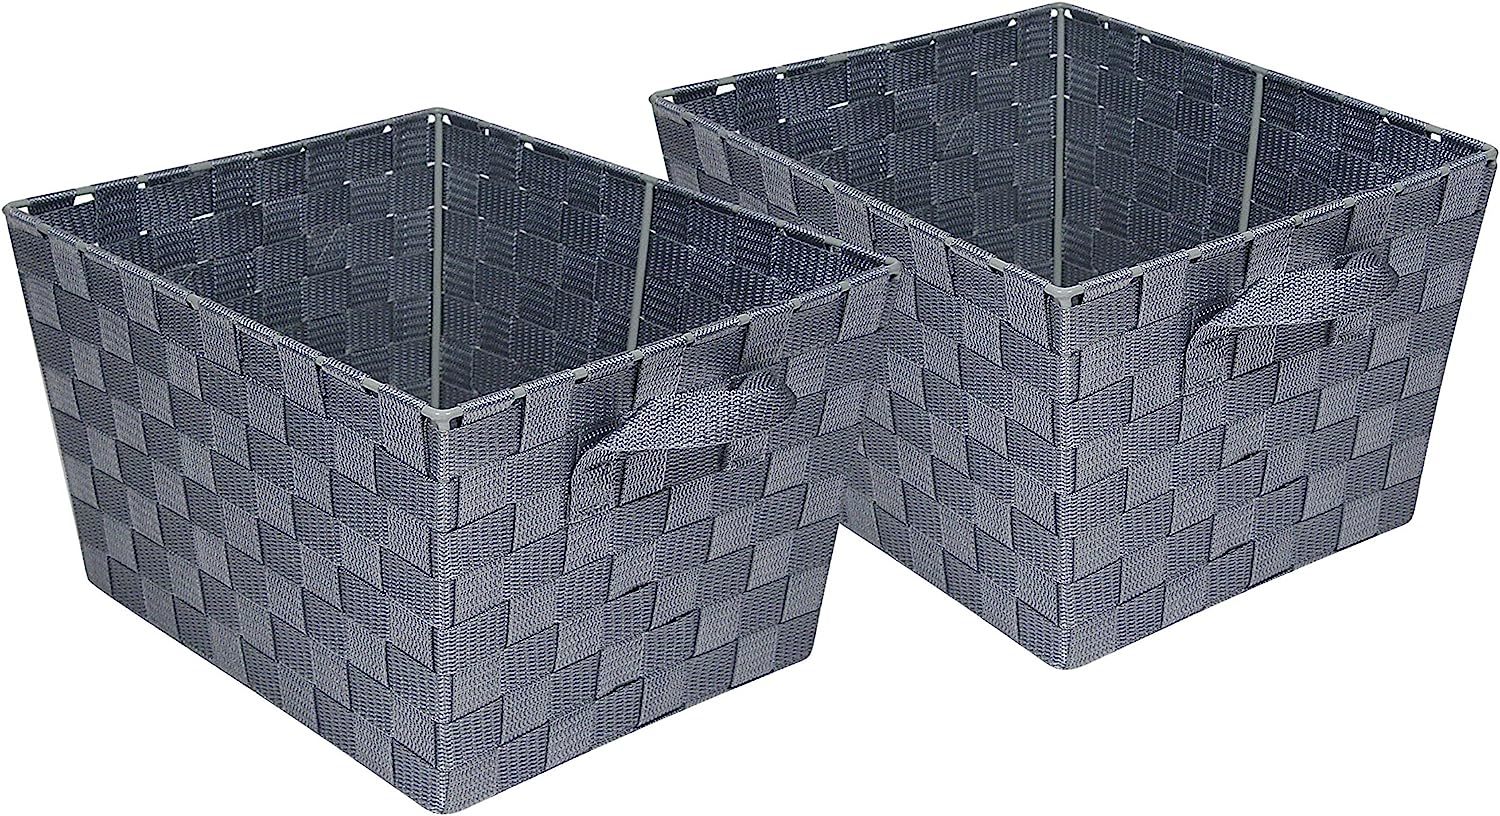 Woven Baskets, Gray, 2-Pack, Honey-Can-Do Sto-05088 - $33.97